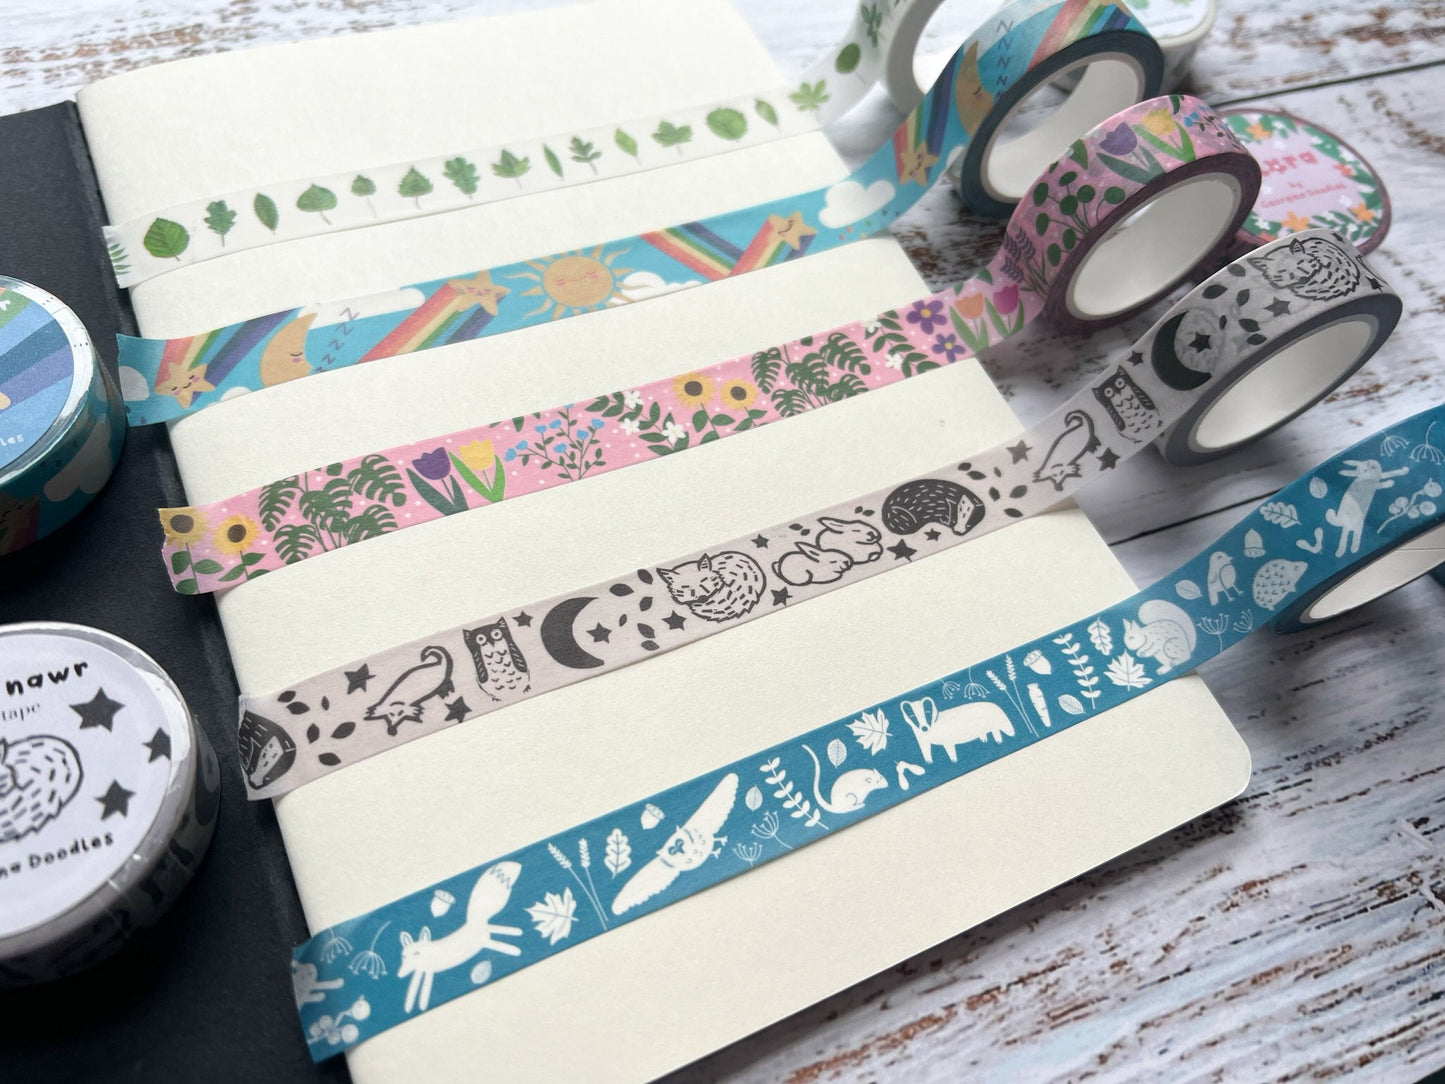 Five different rolls of washi tape across a notebook